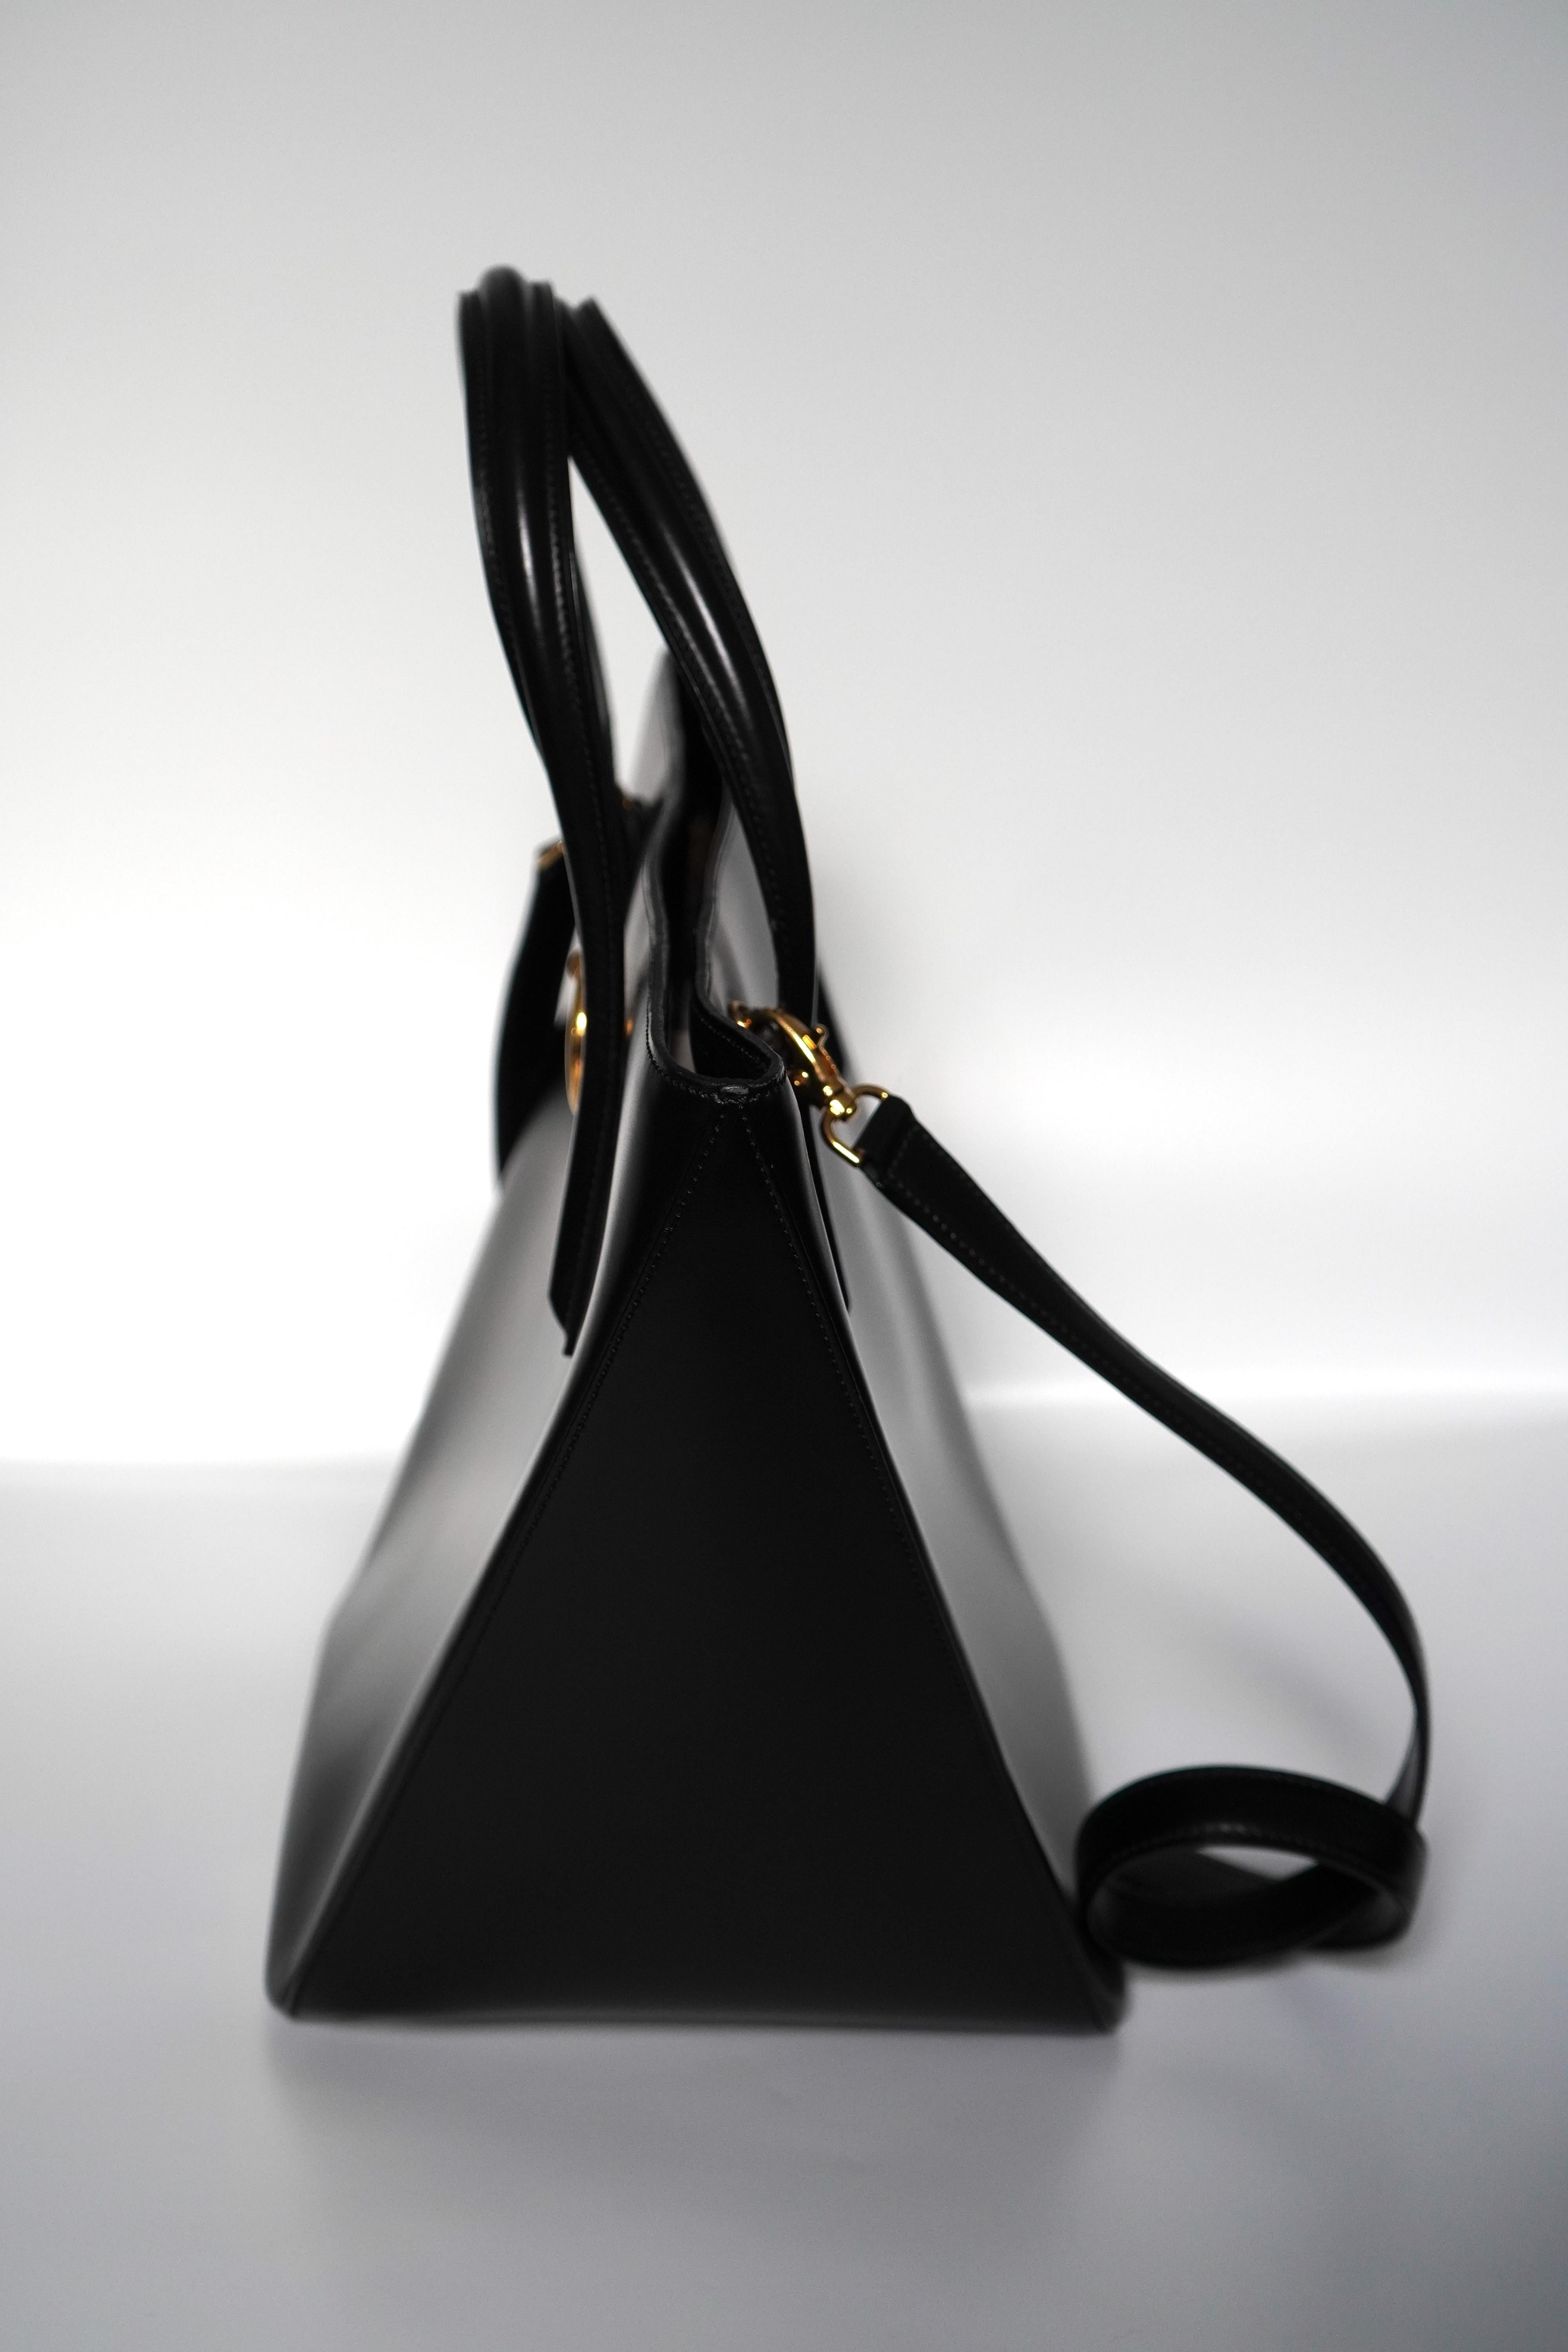 Black structured bag from Cartier with the
iconic Cartier panther ring detail. The inside of the bag features a dual zipper and open pocket, animal print lining, and a zip to close. The total height of the bag including the handles is 15 inches,